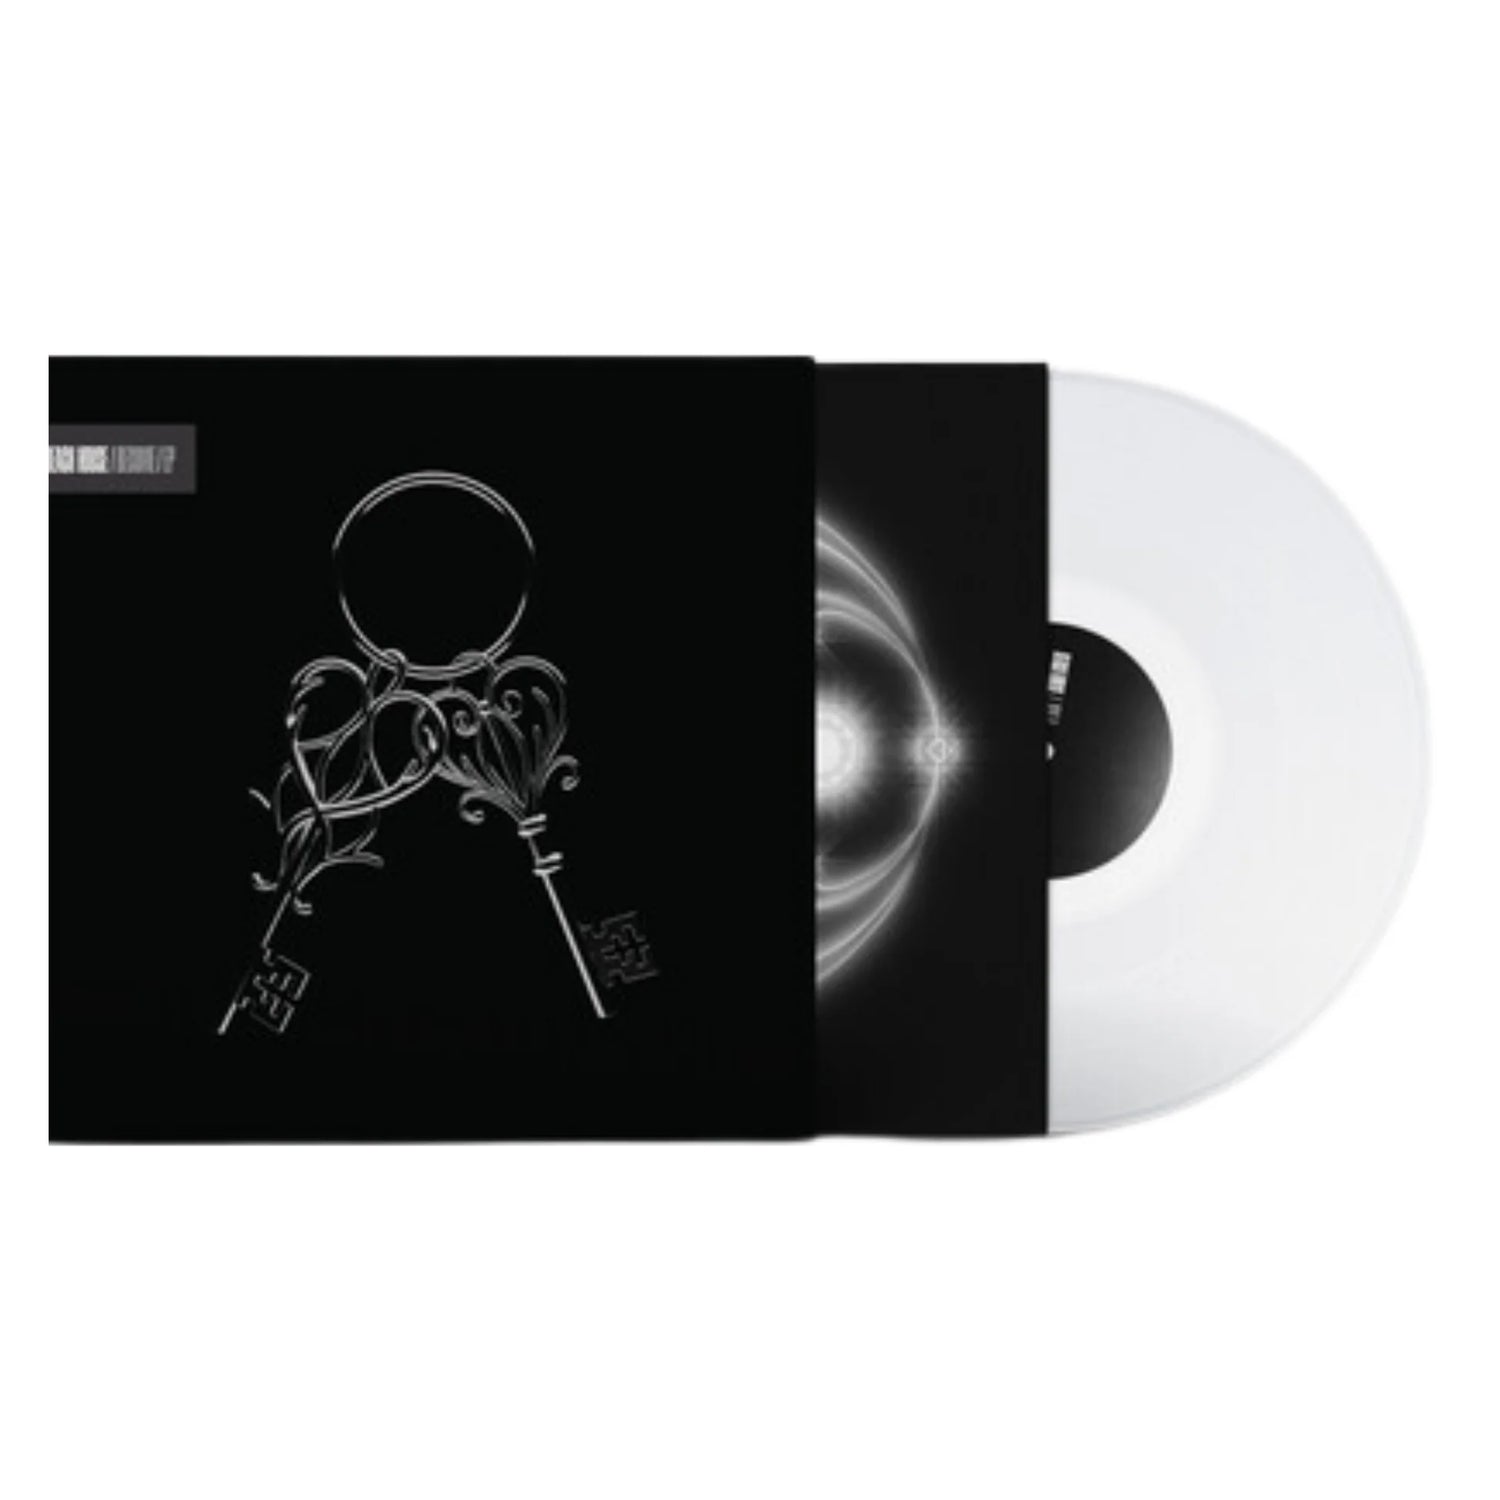 Become Ep (Crystal Clear Vinyl)